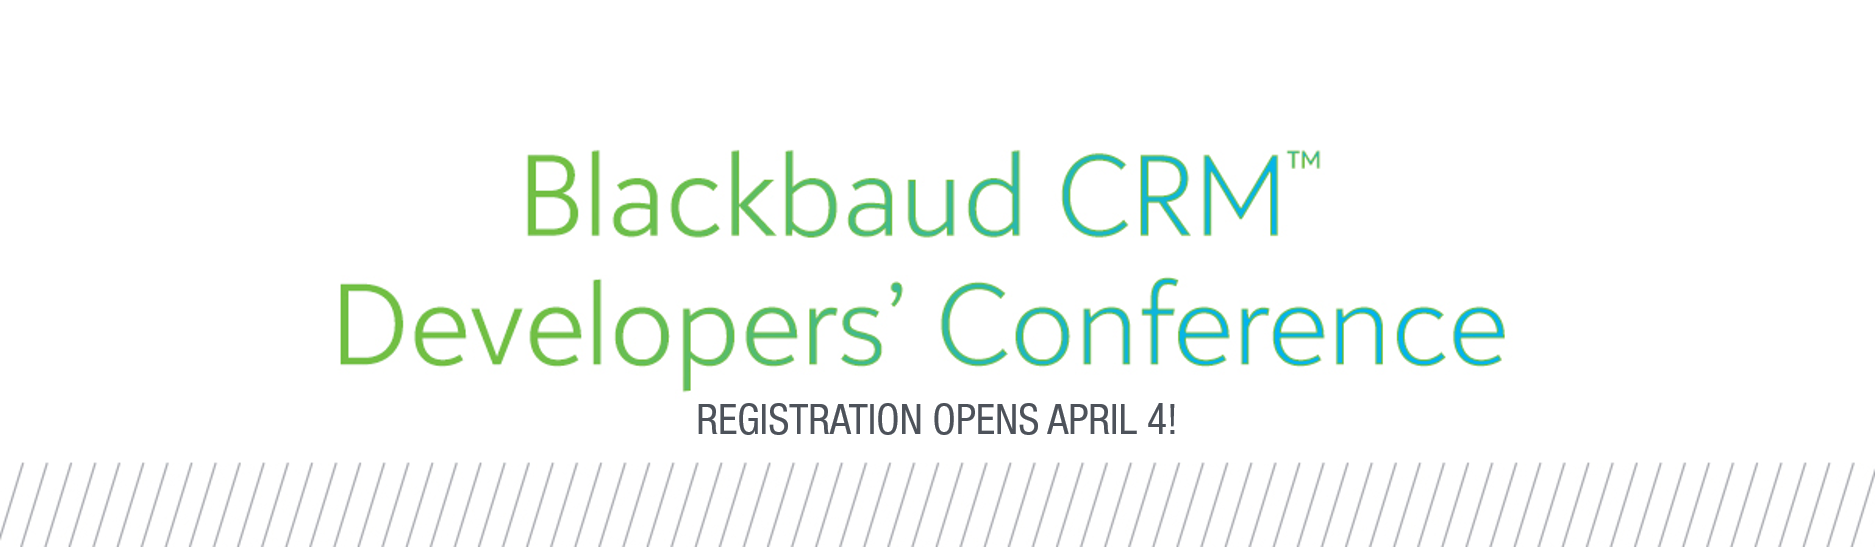 Mark Your Calendars: April 4th - Registration opens for the Developer's Conference 4543